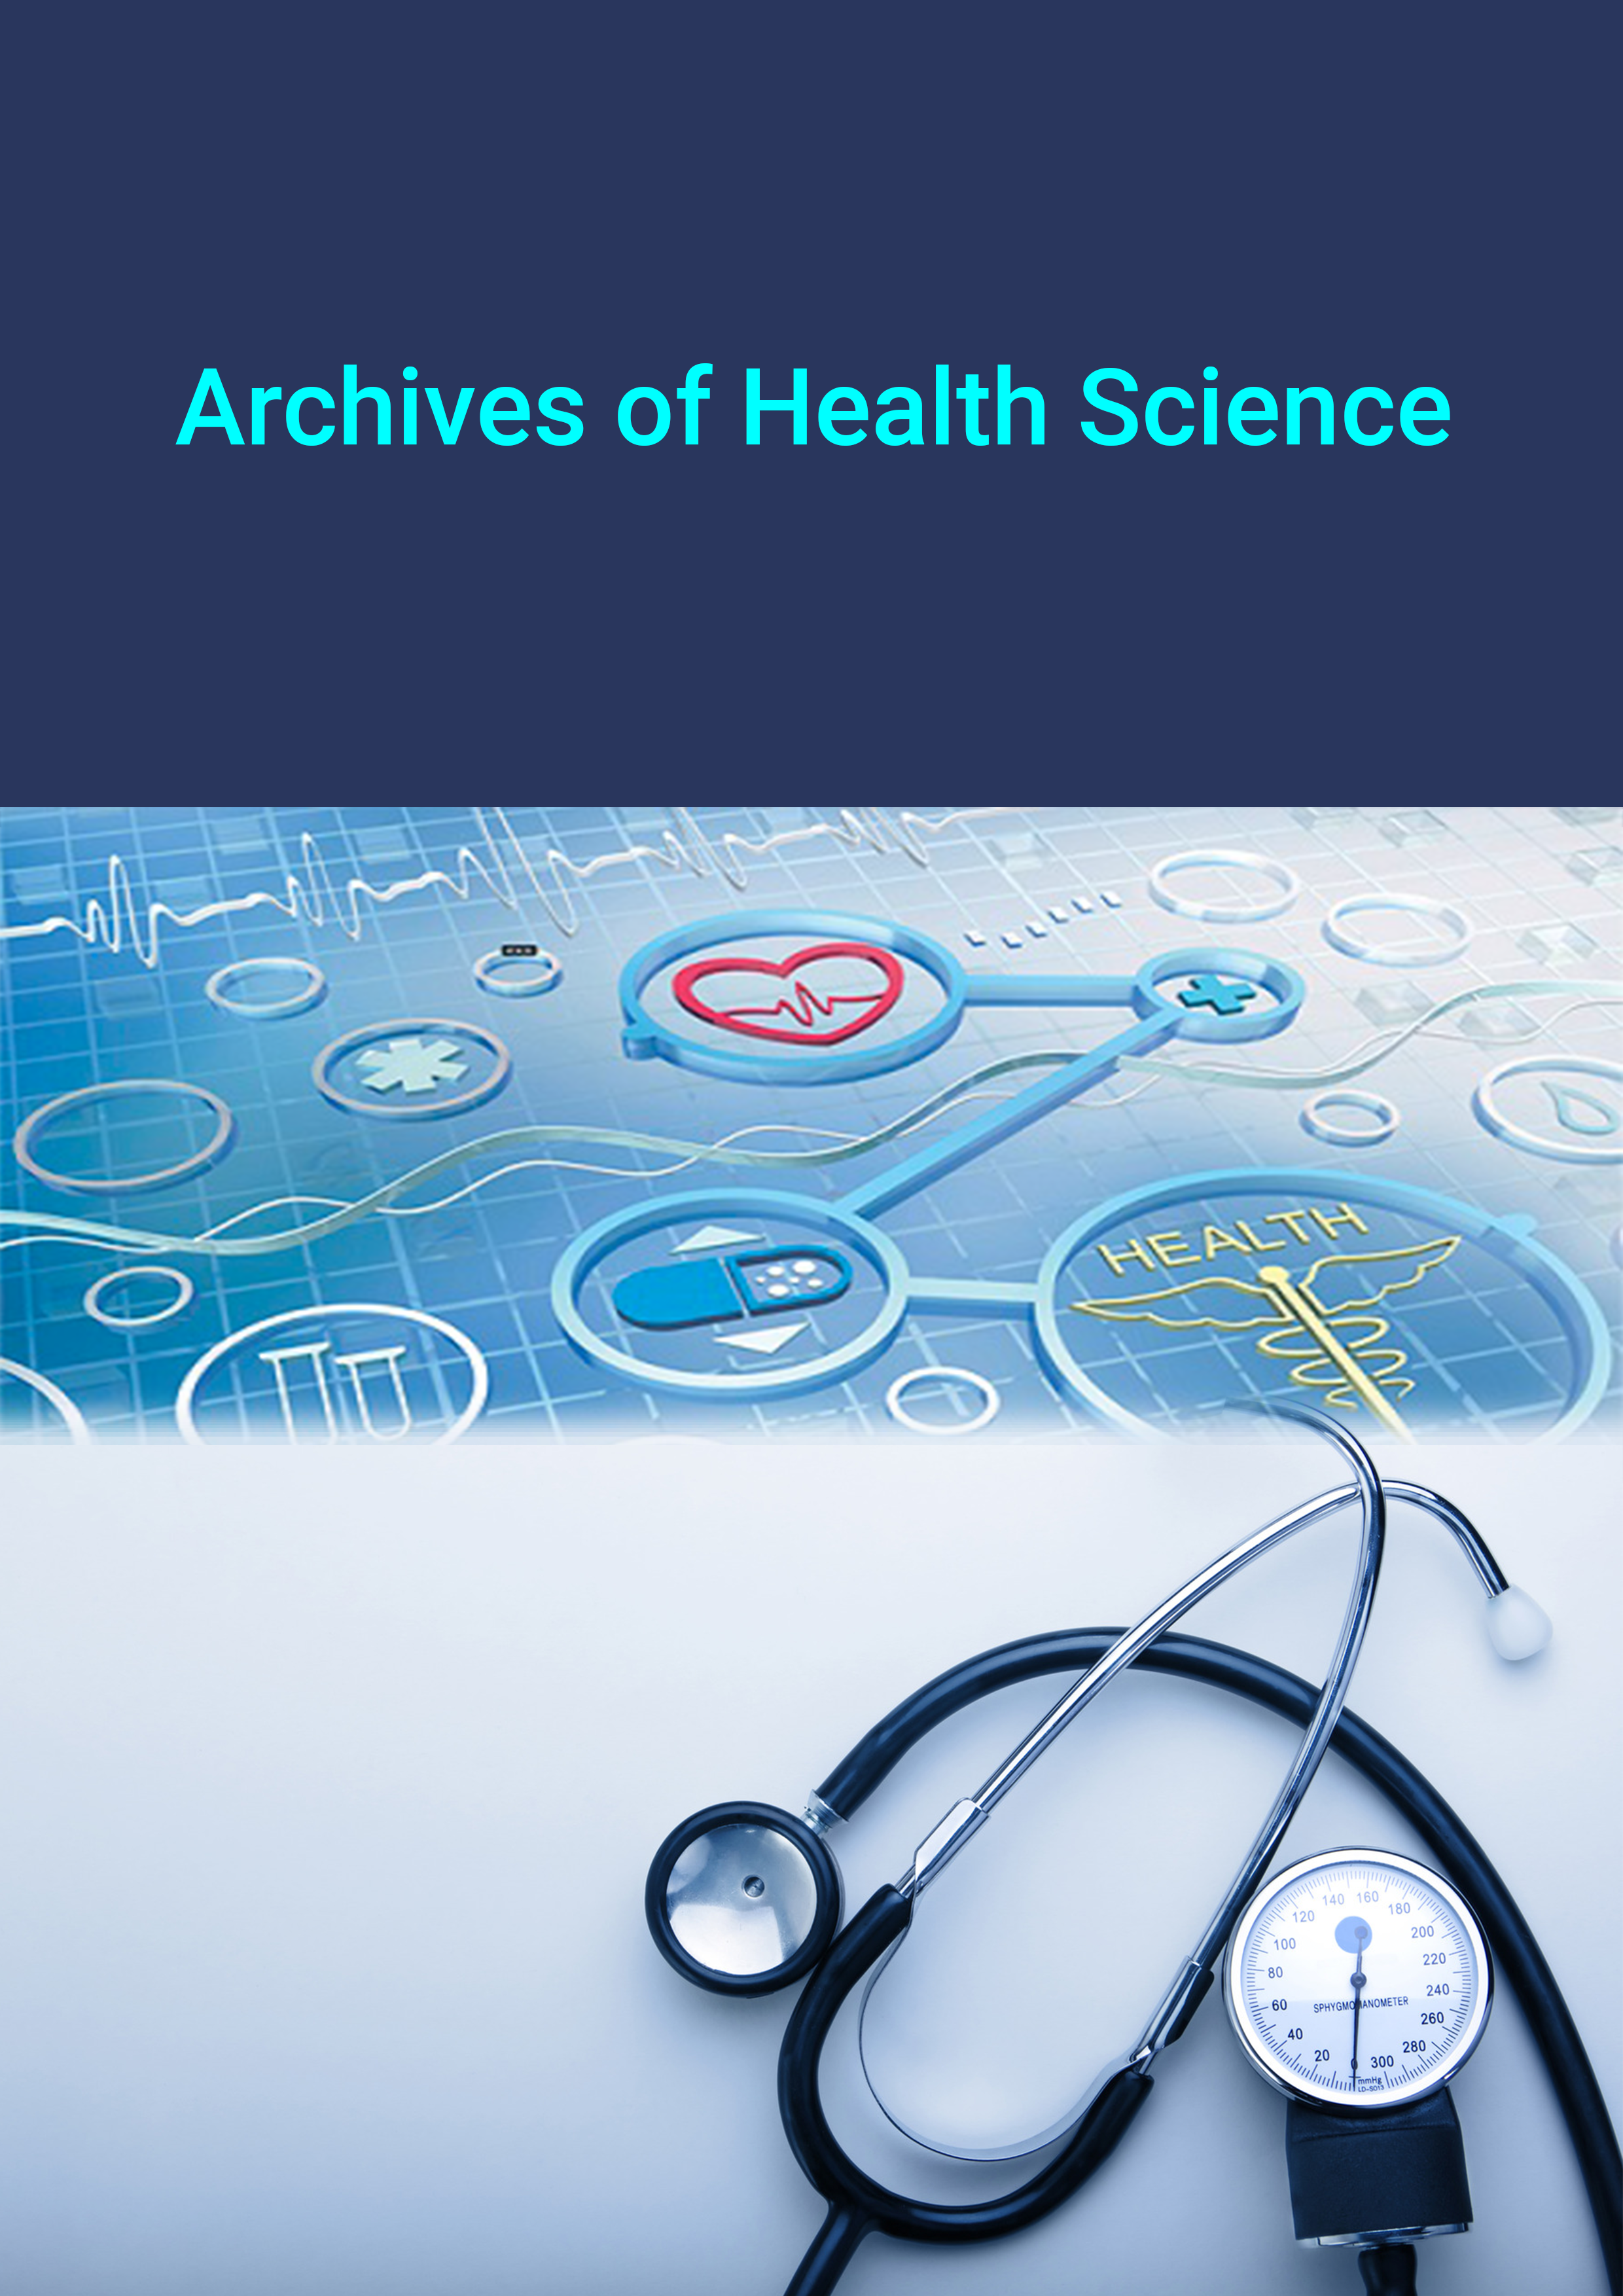 Archives of Health Science